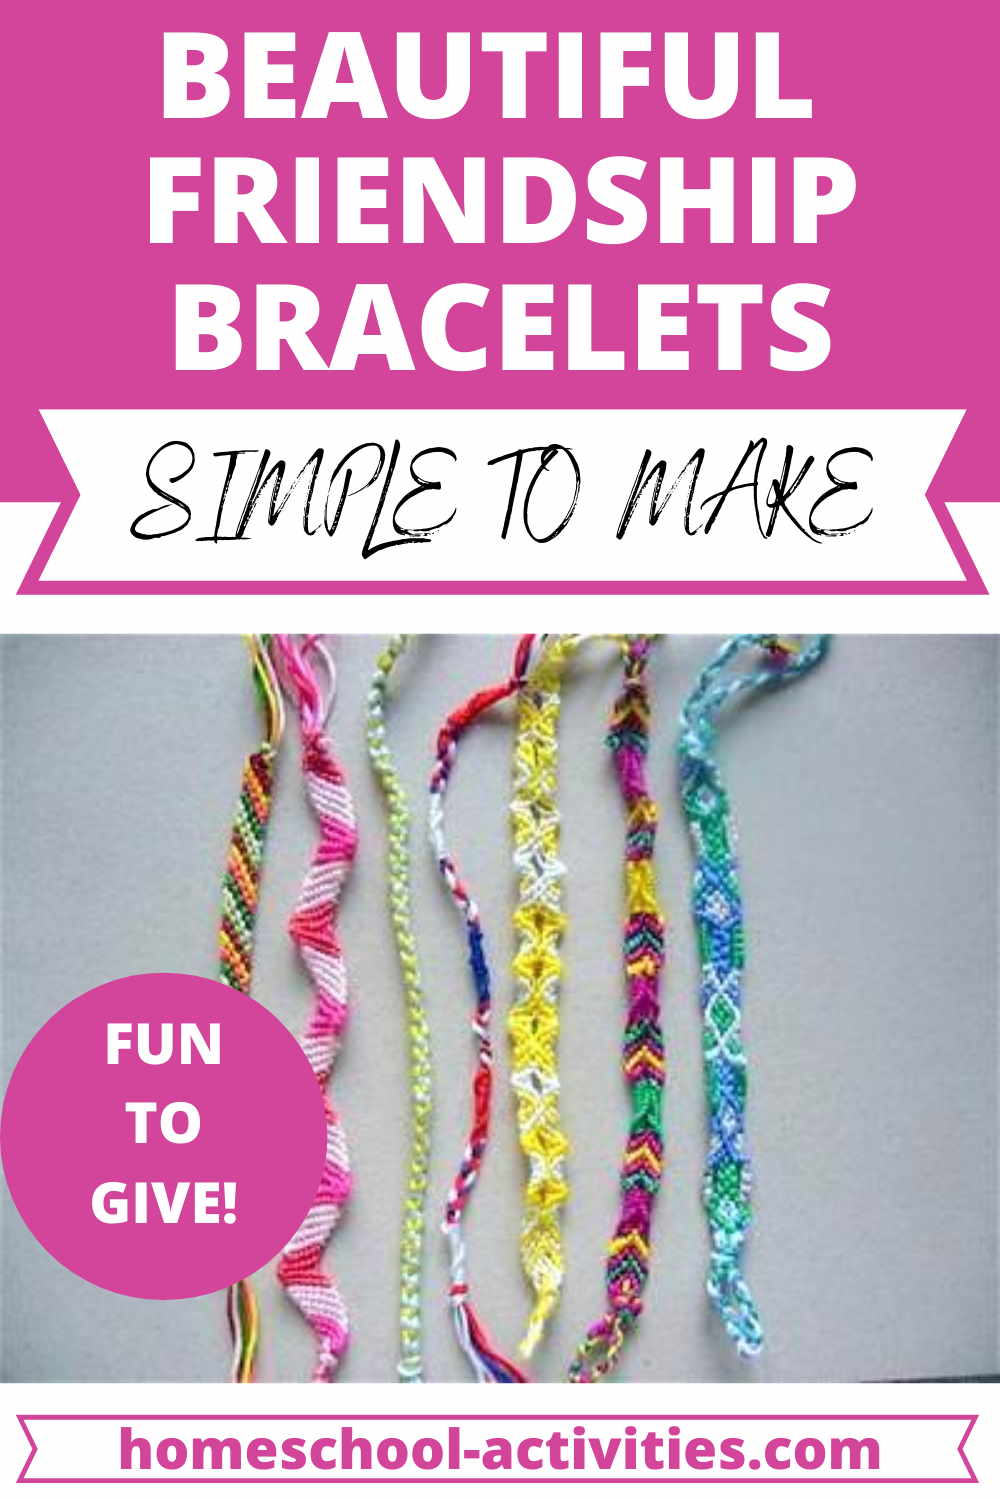 FRIENDSHIP BRACELETS FOR BEGINNERS Step by Step Guide to Friendship  Bracelet Making with DIY Picture Instructions eBook  Derrick Sandra   Amazonin Kindle Store